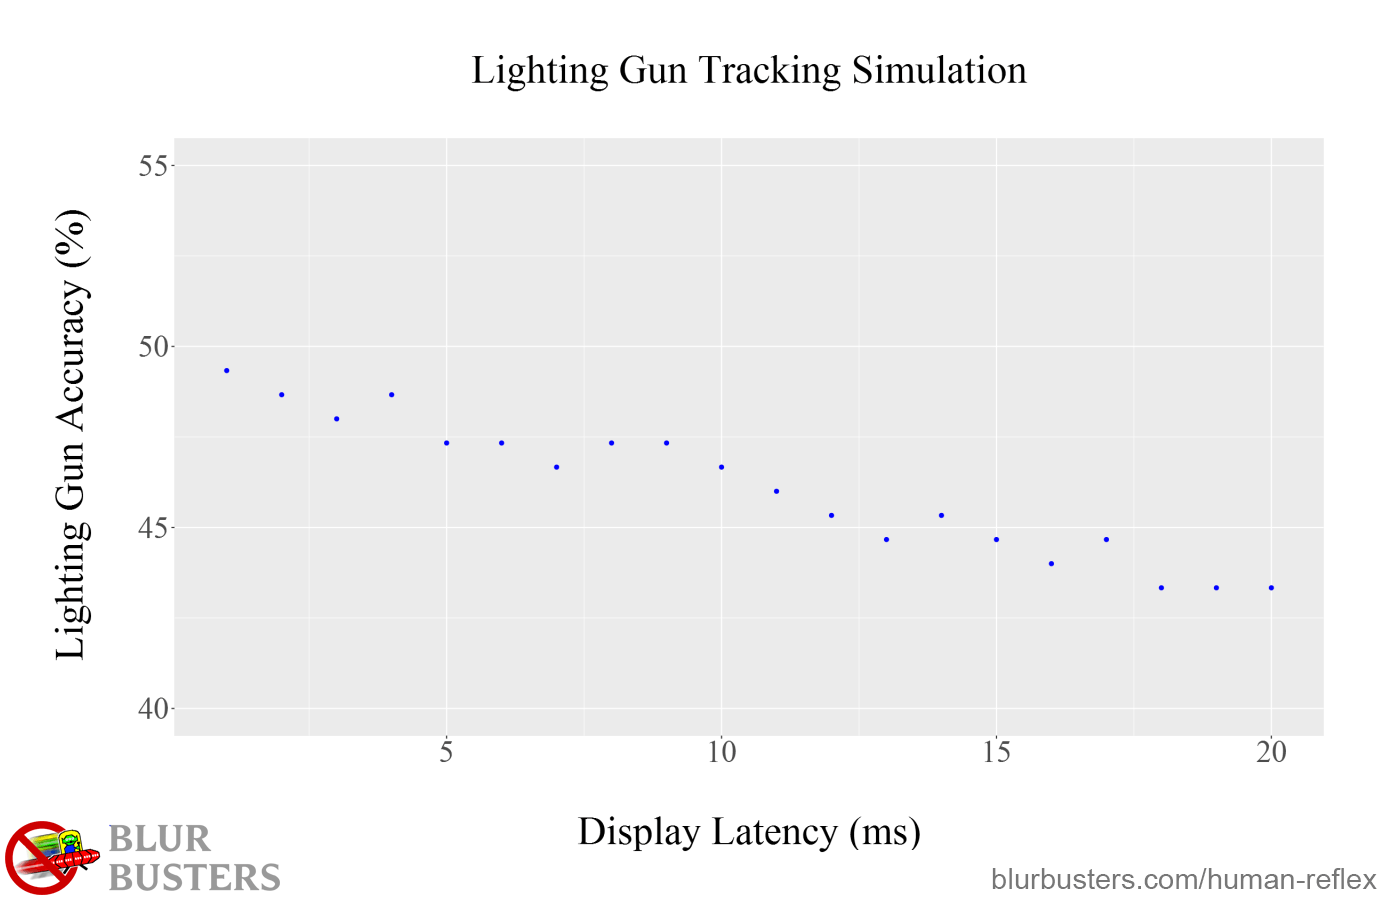 Blur Buster's Input Lag and the Limits of Human Reflex: Light Gun Tracking Simulation